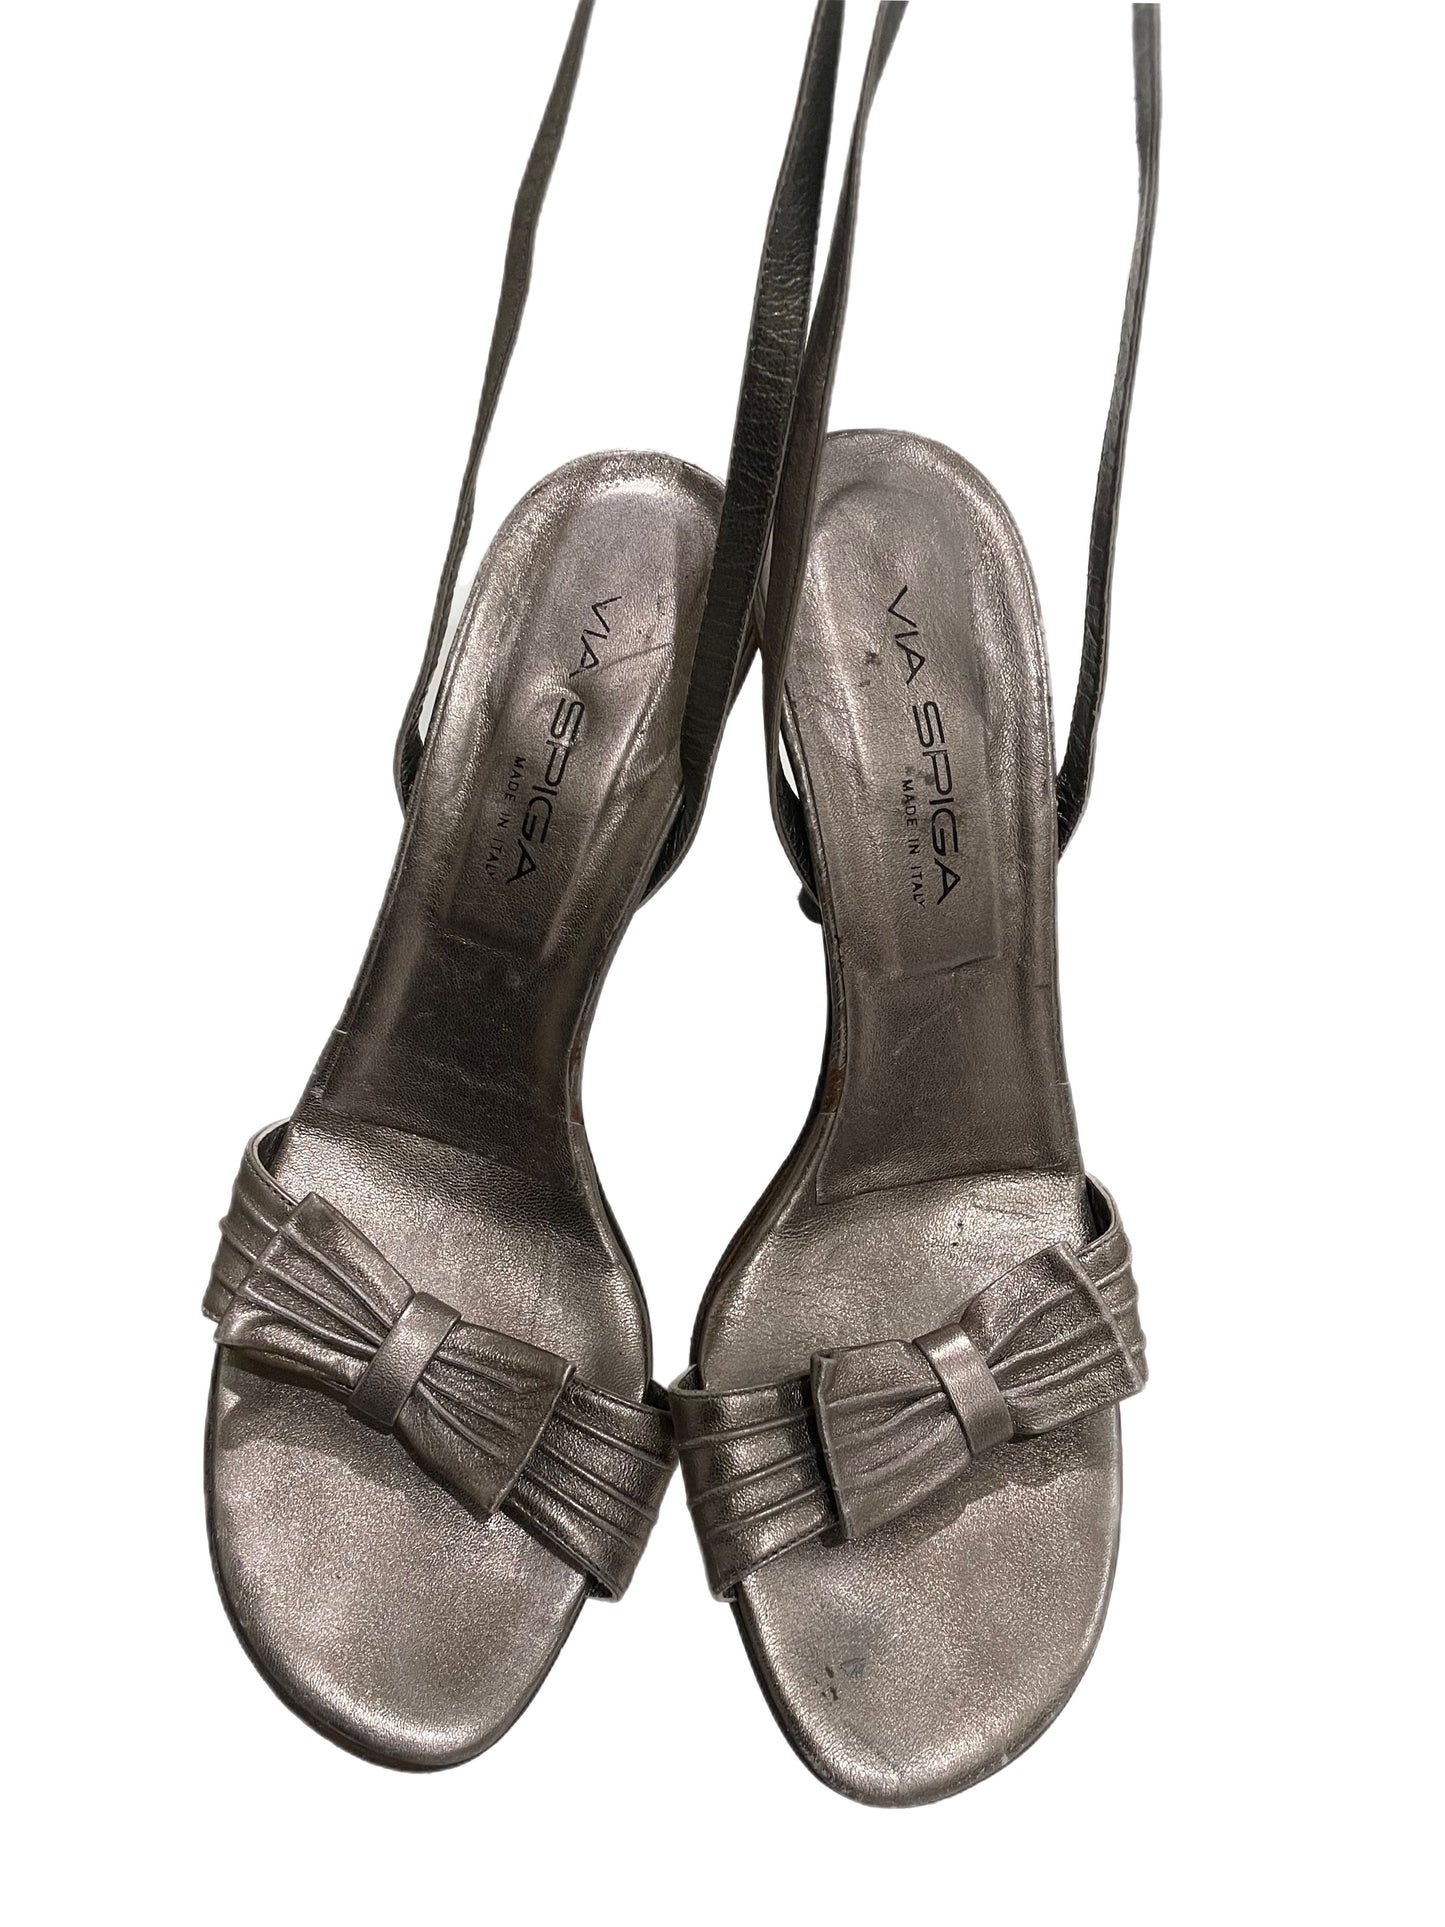 Heels- Ankle Strap Design- Silver Colored By Via Spiga